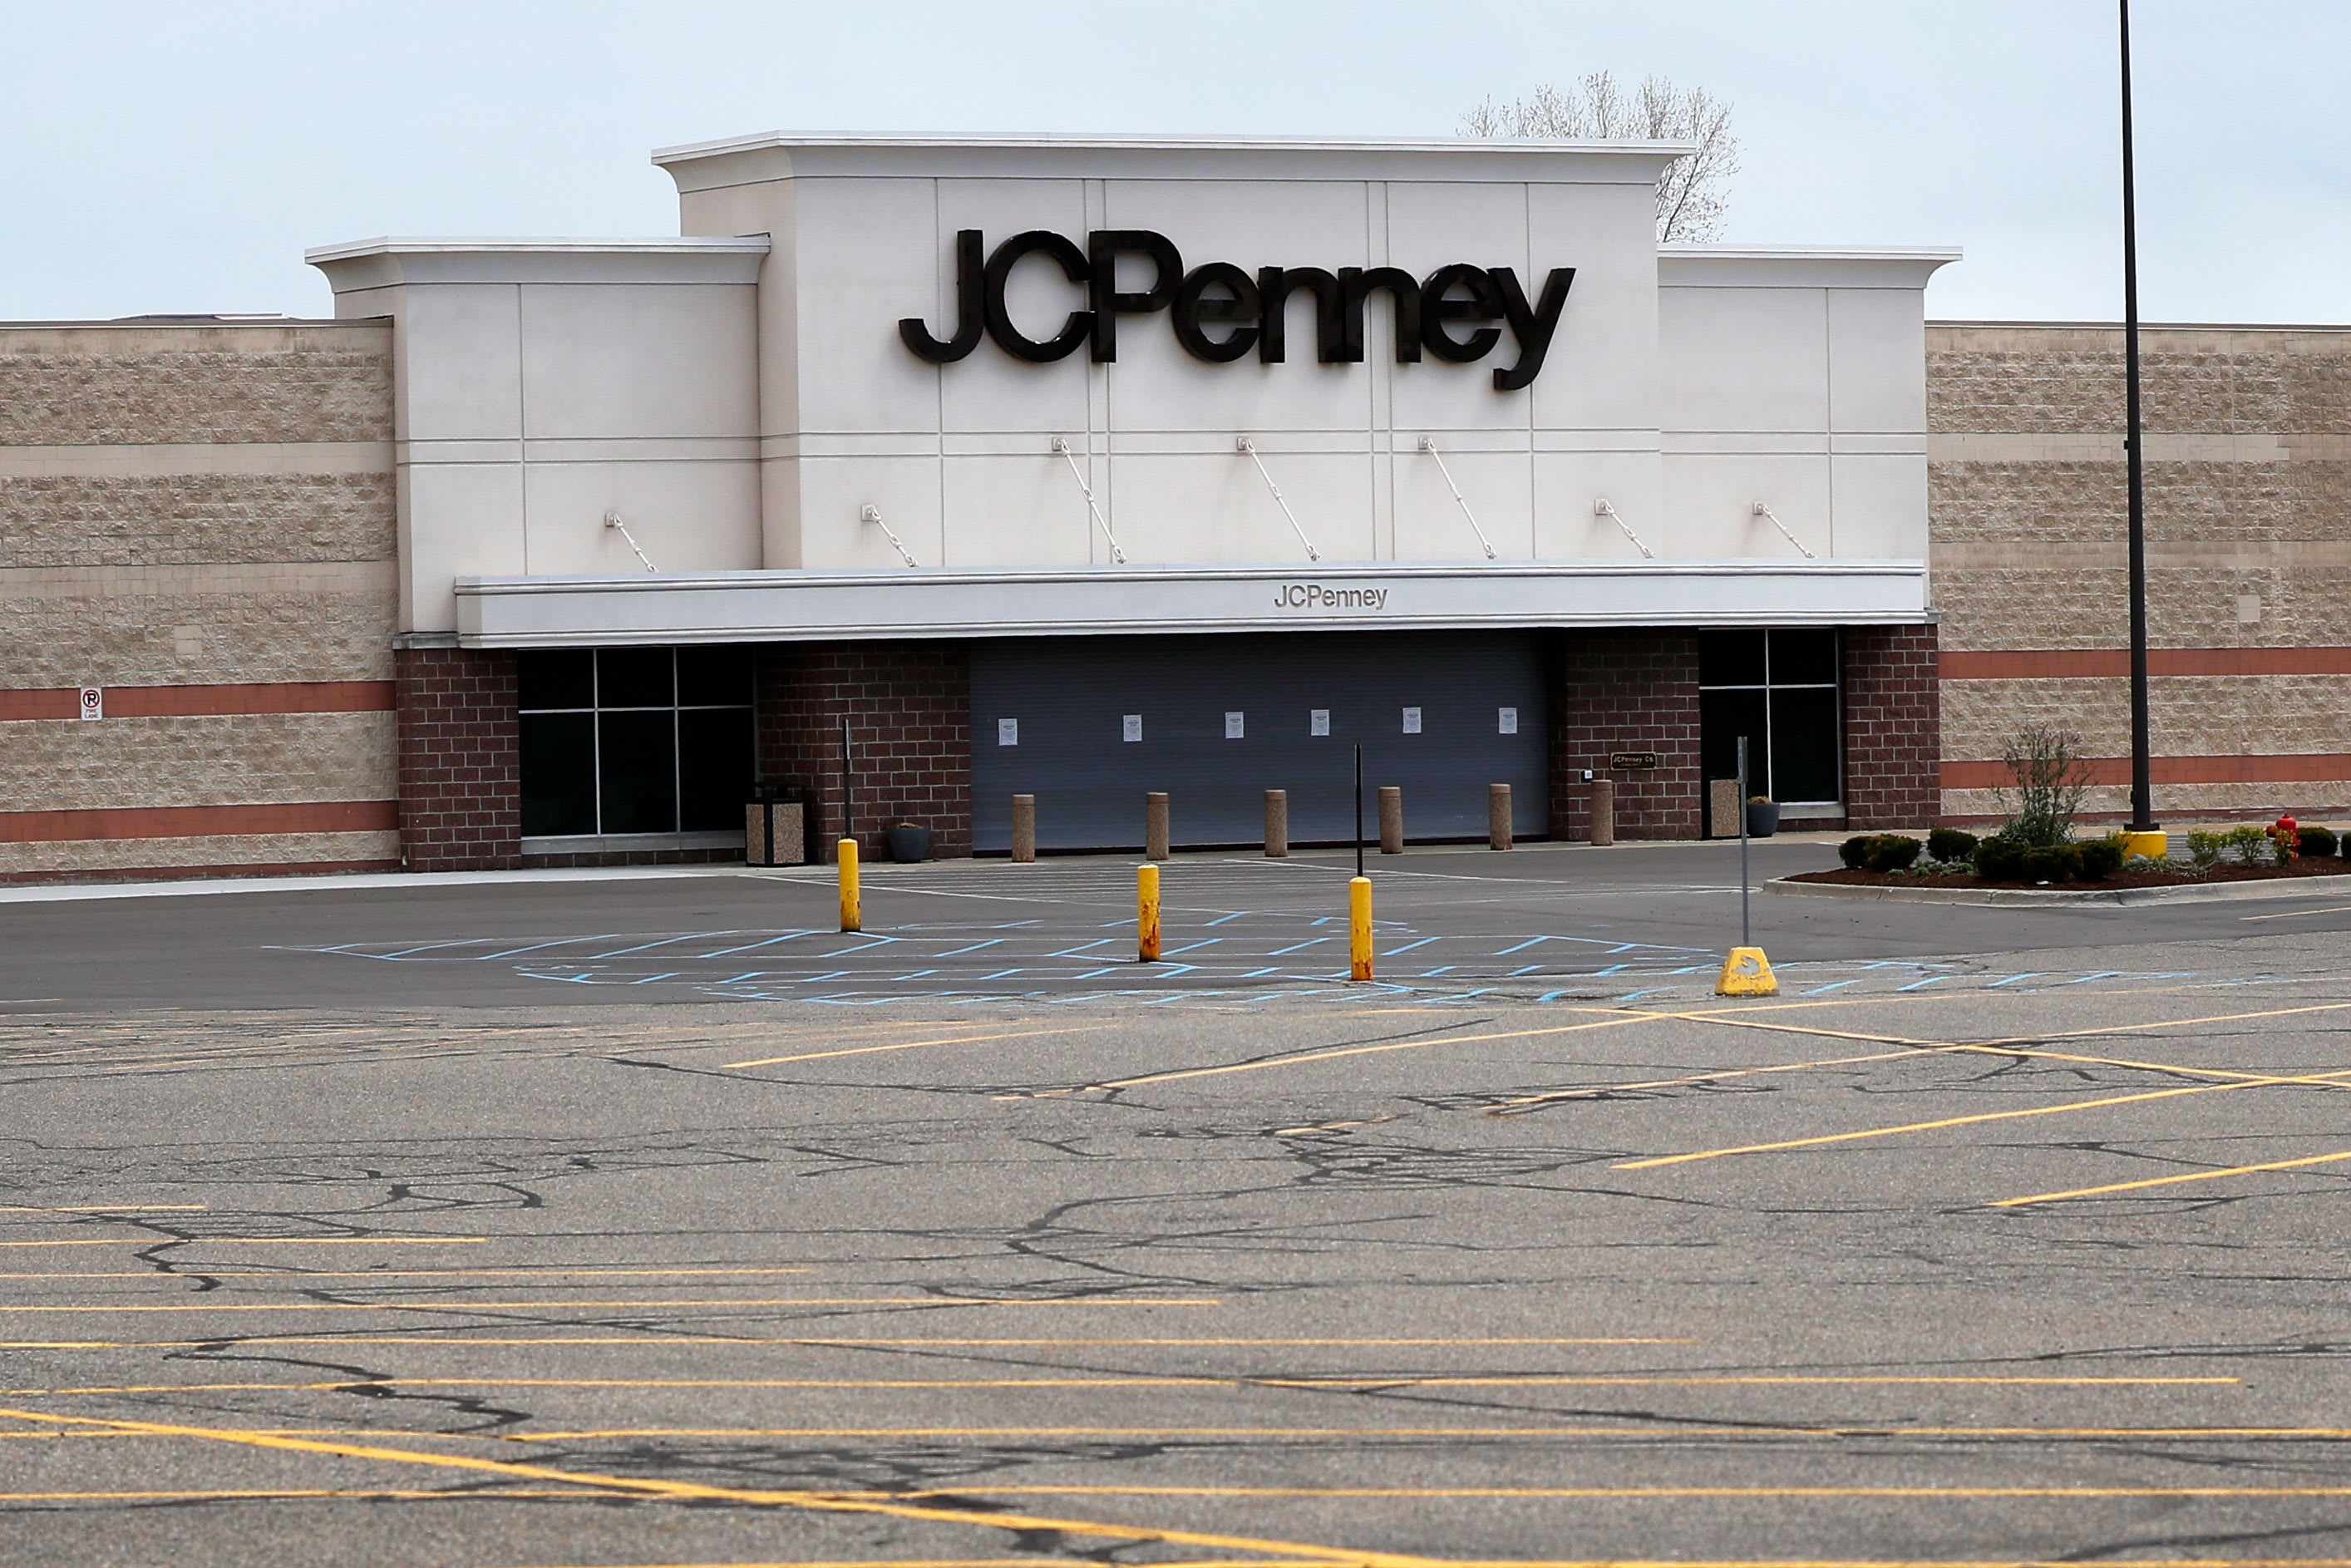 JC Penney could join a growing list of bankruptcies during the coronavirus pandemic